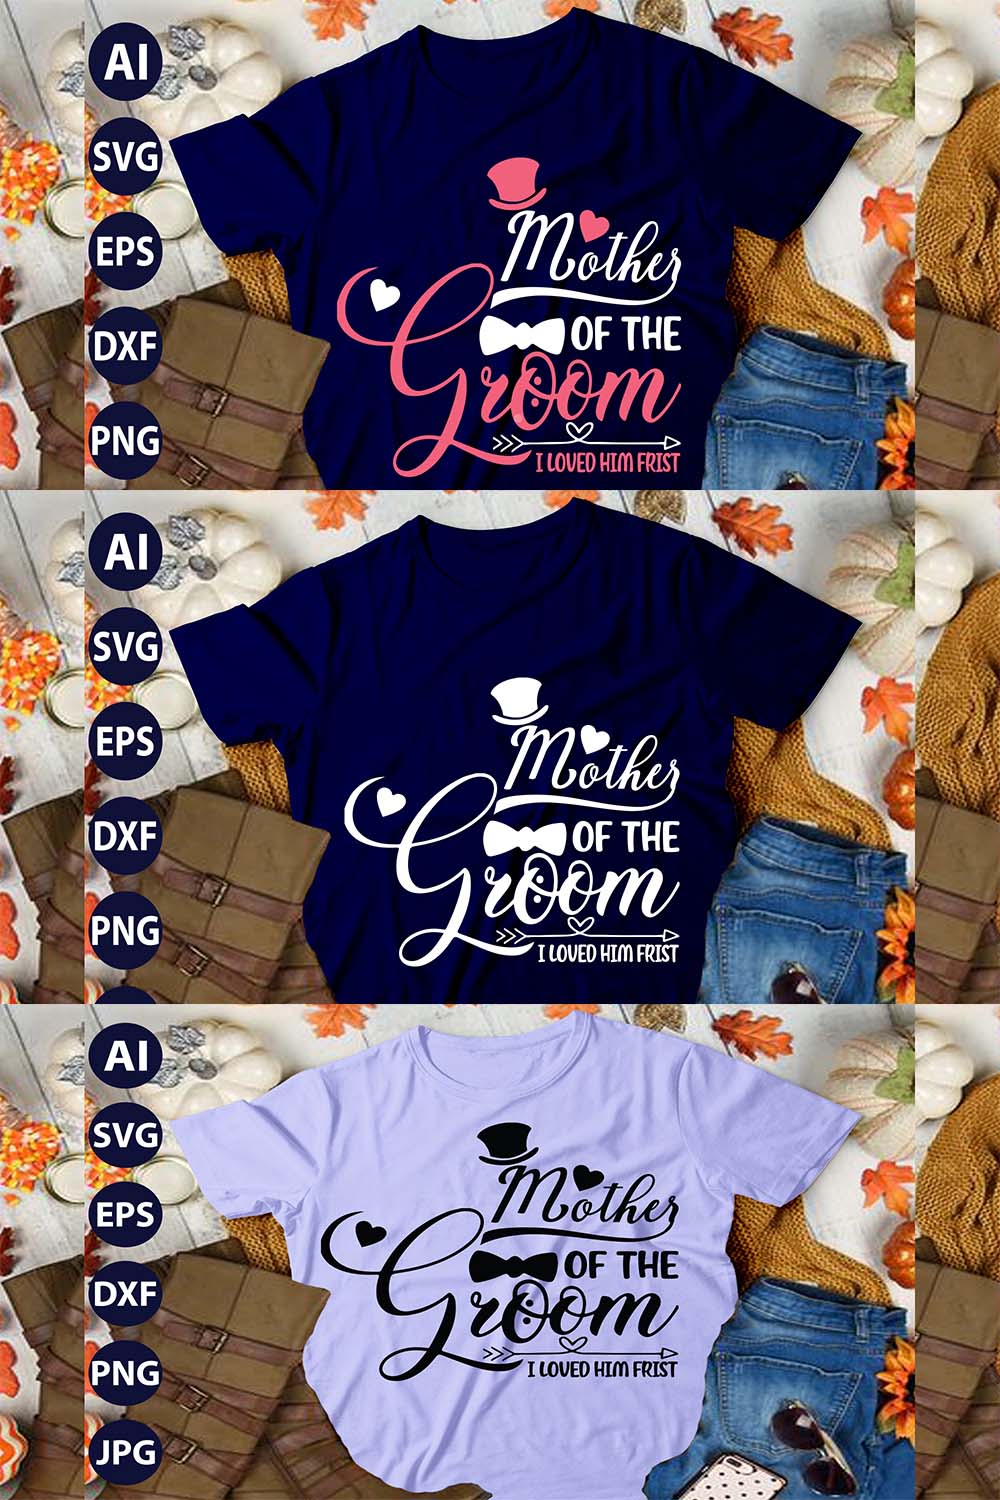 Love Mom | Mother Of The Groom | Ai, Svg, Eps, Dxf, Jpeg, Png, Instant download T-Shirt Digital Prints file pinterest preview image.